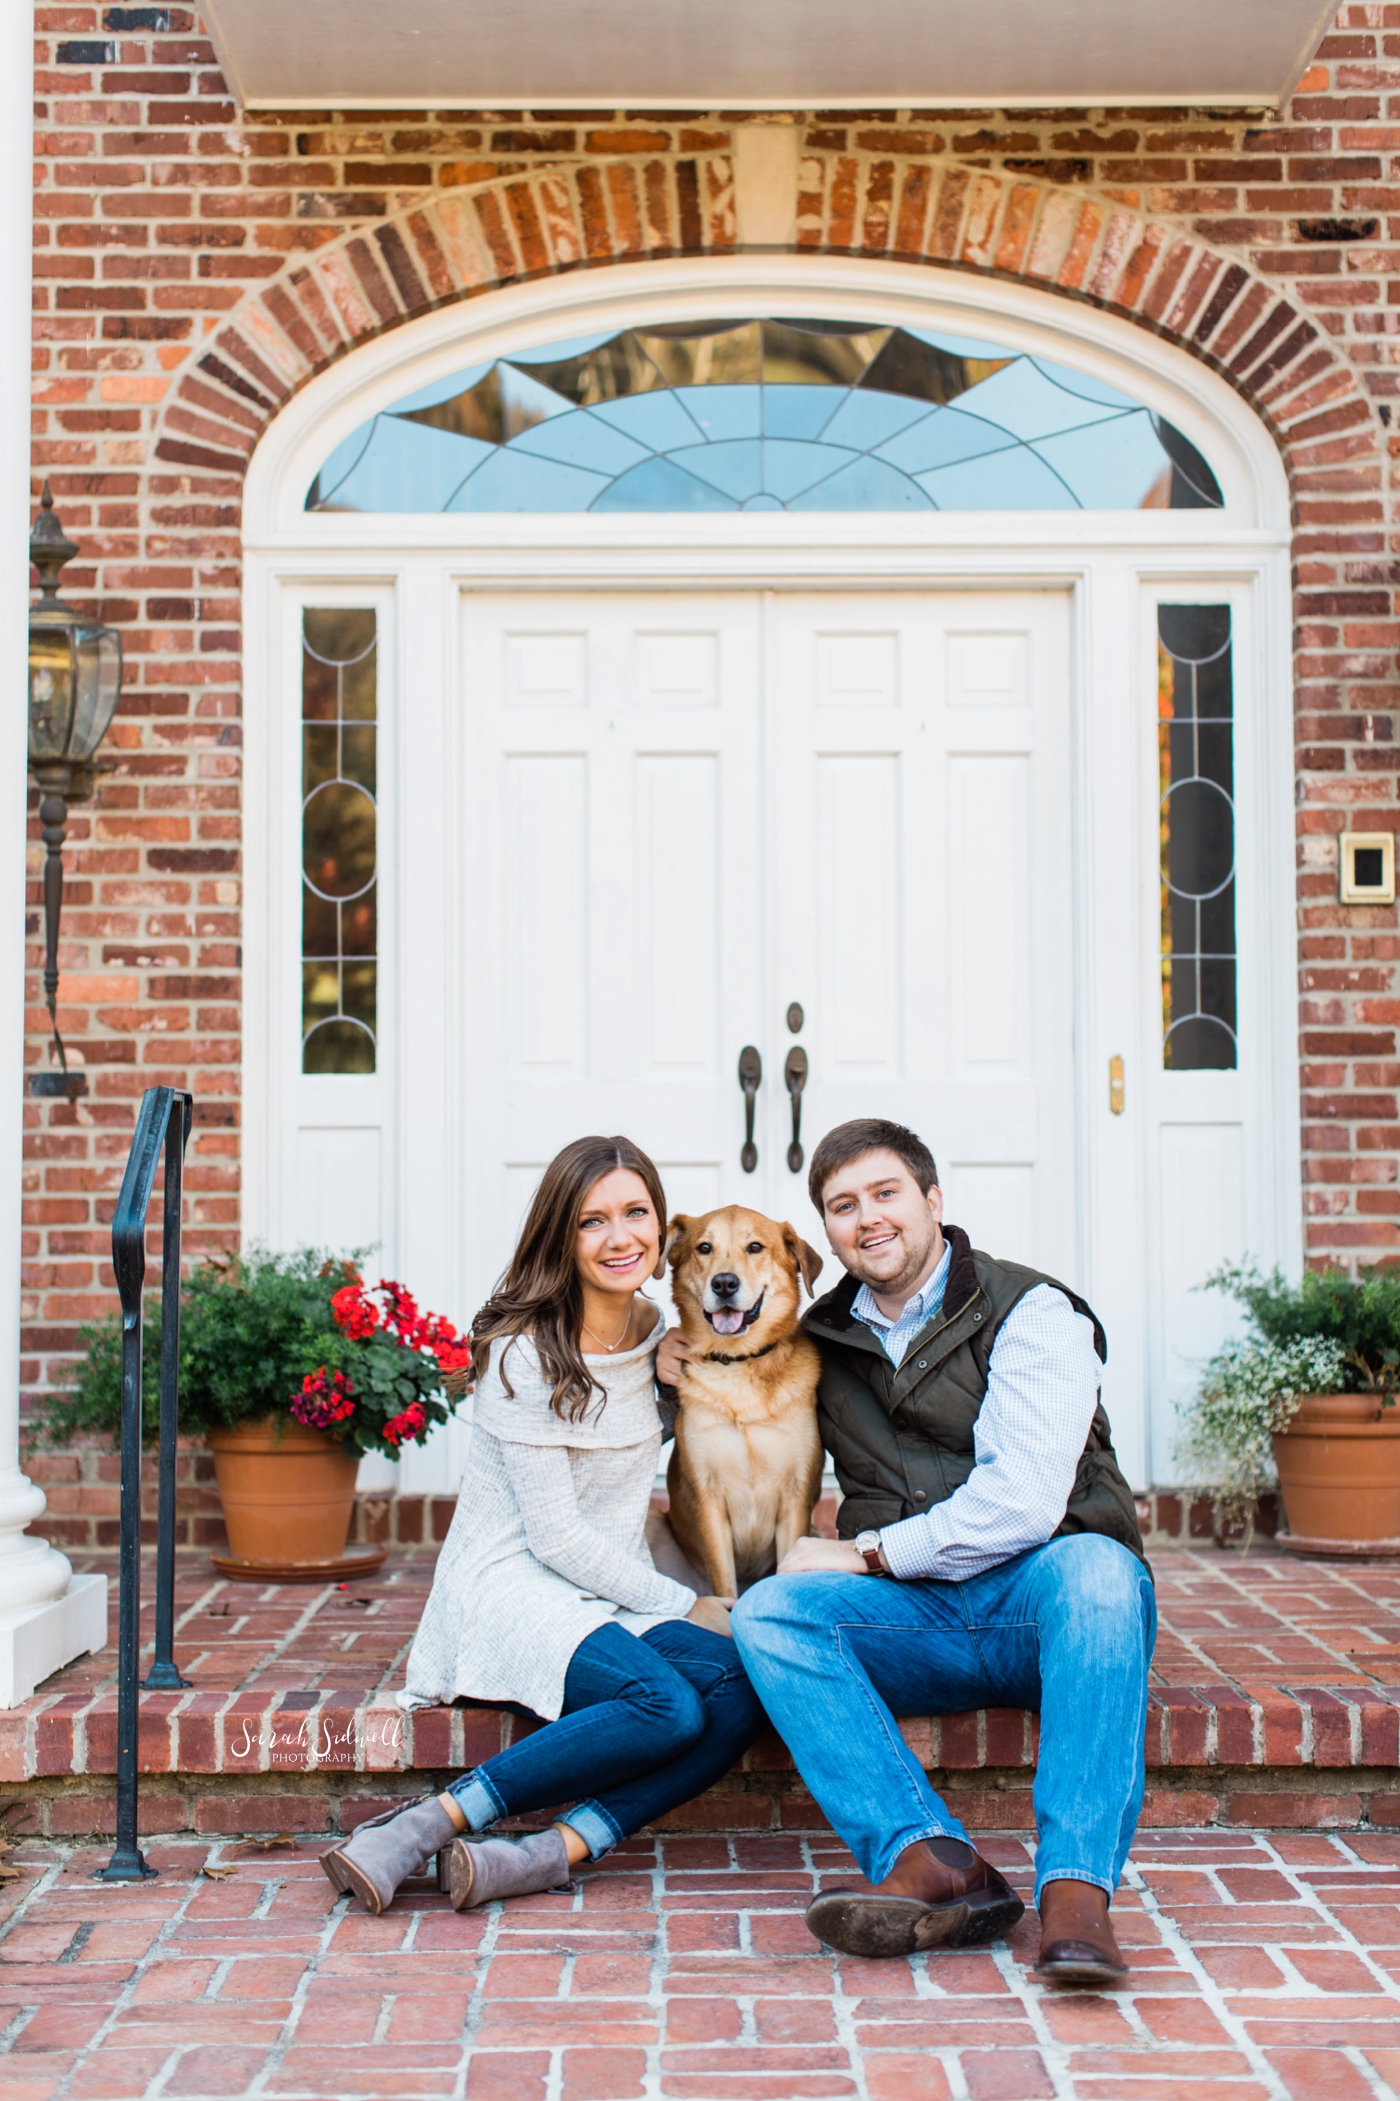 A couple pose with their dog | Engagement Photography Nashville